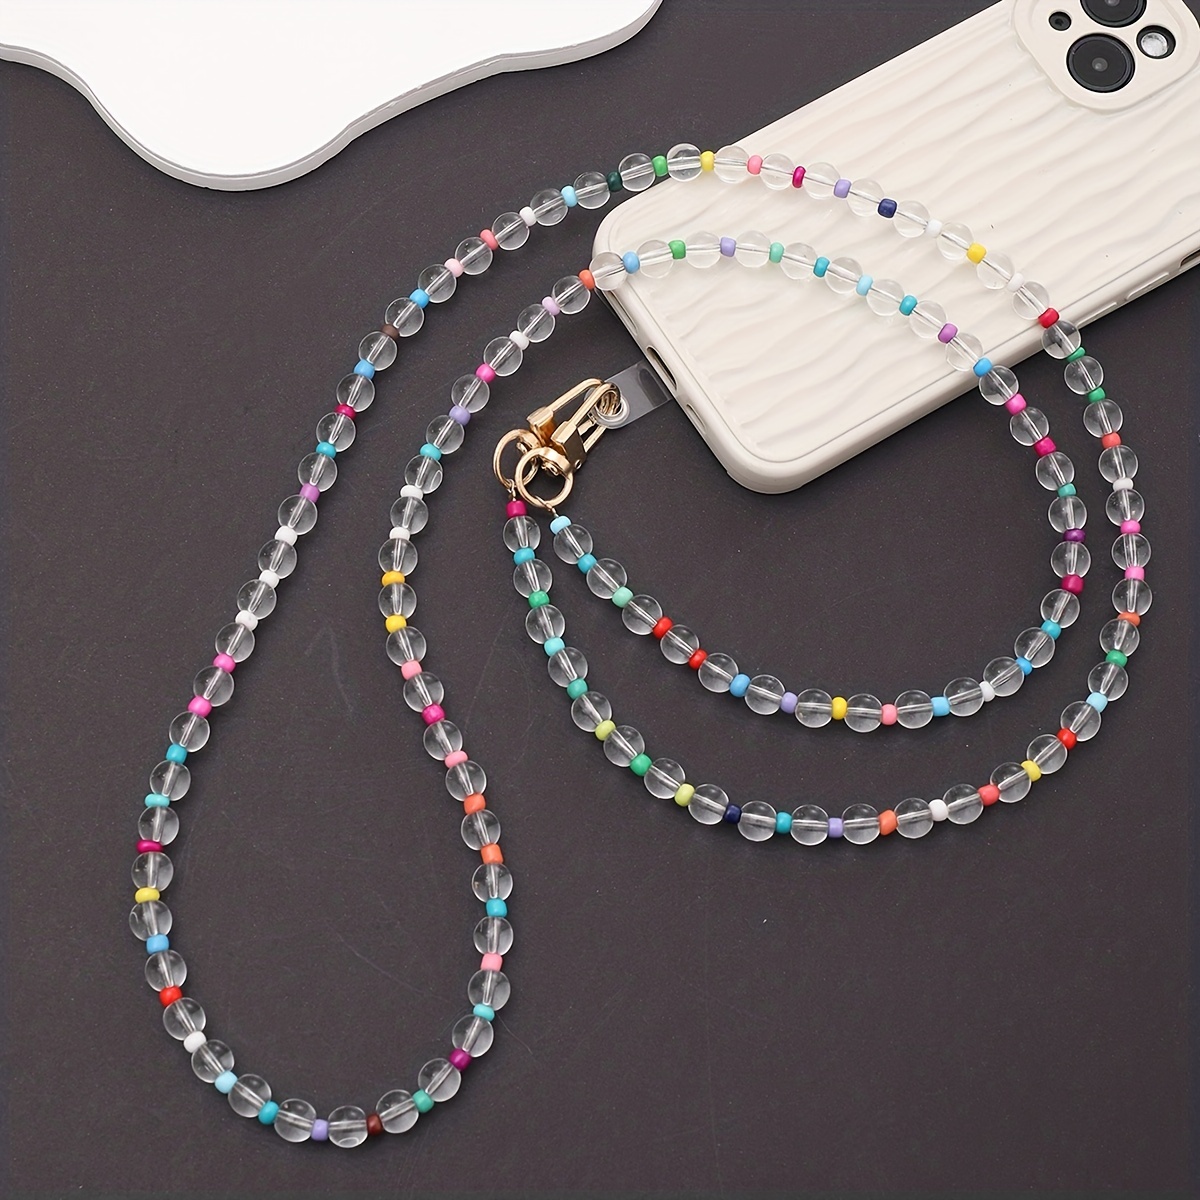 

Transparent Glass Beads Colorful Small Beads Long Diagonal Mobile Phone Lanyard With A Transparent Card